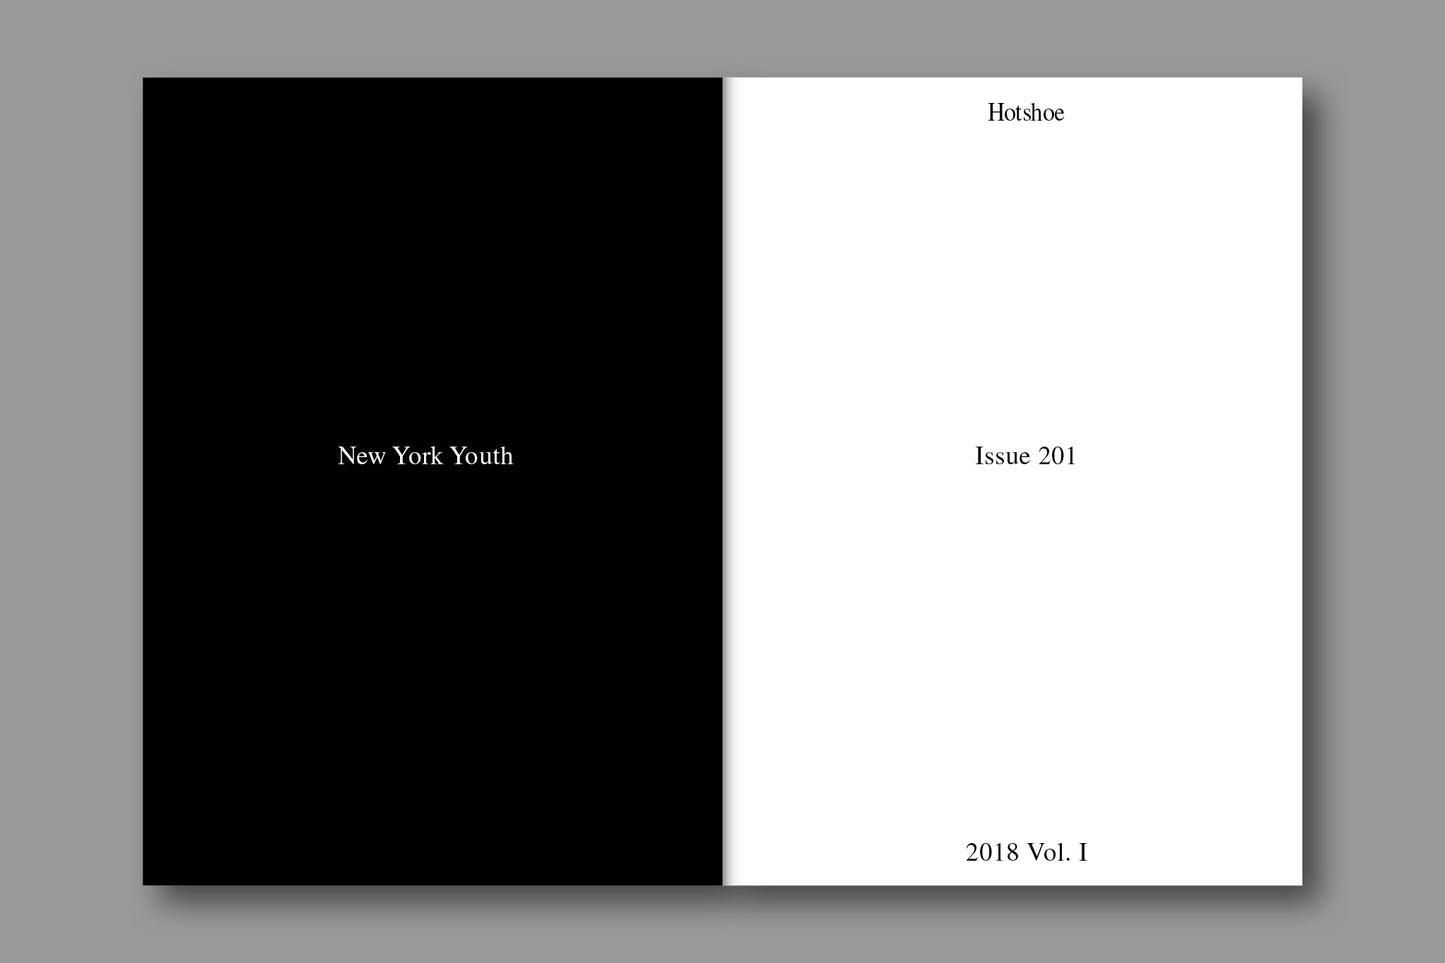 Issue 201: New York Youth